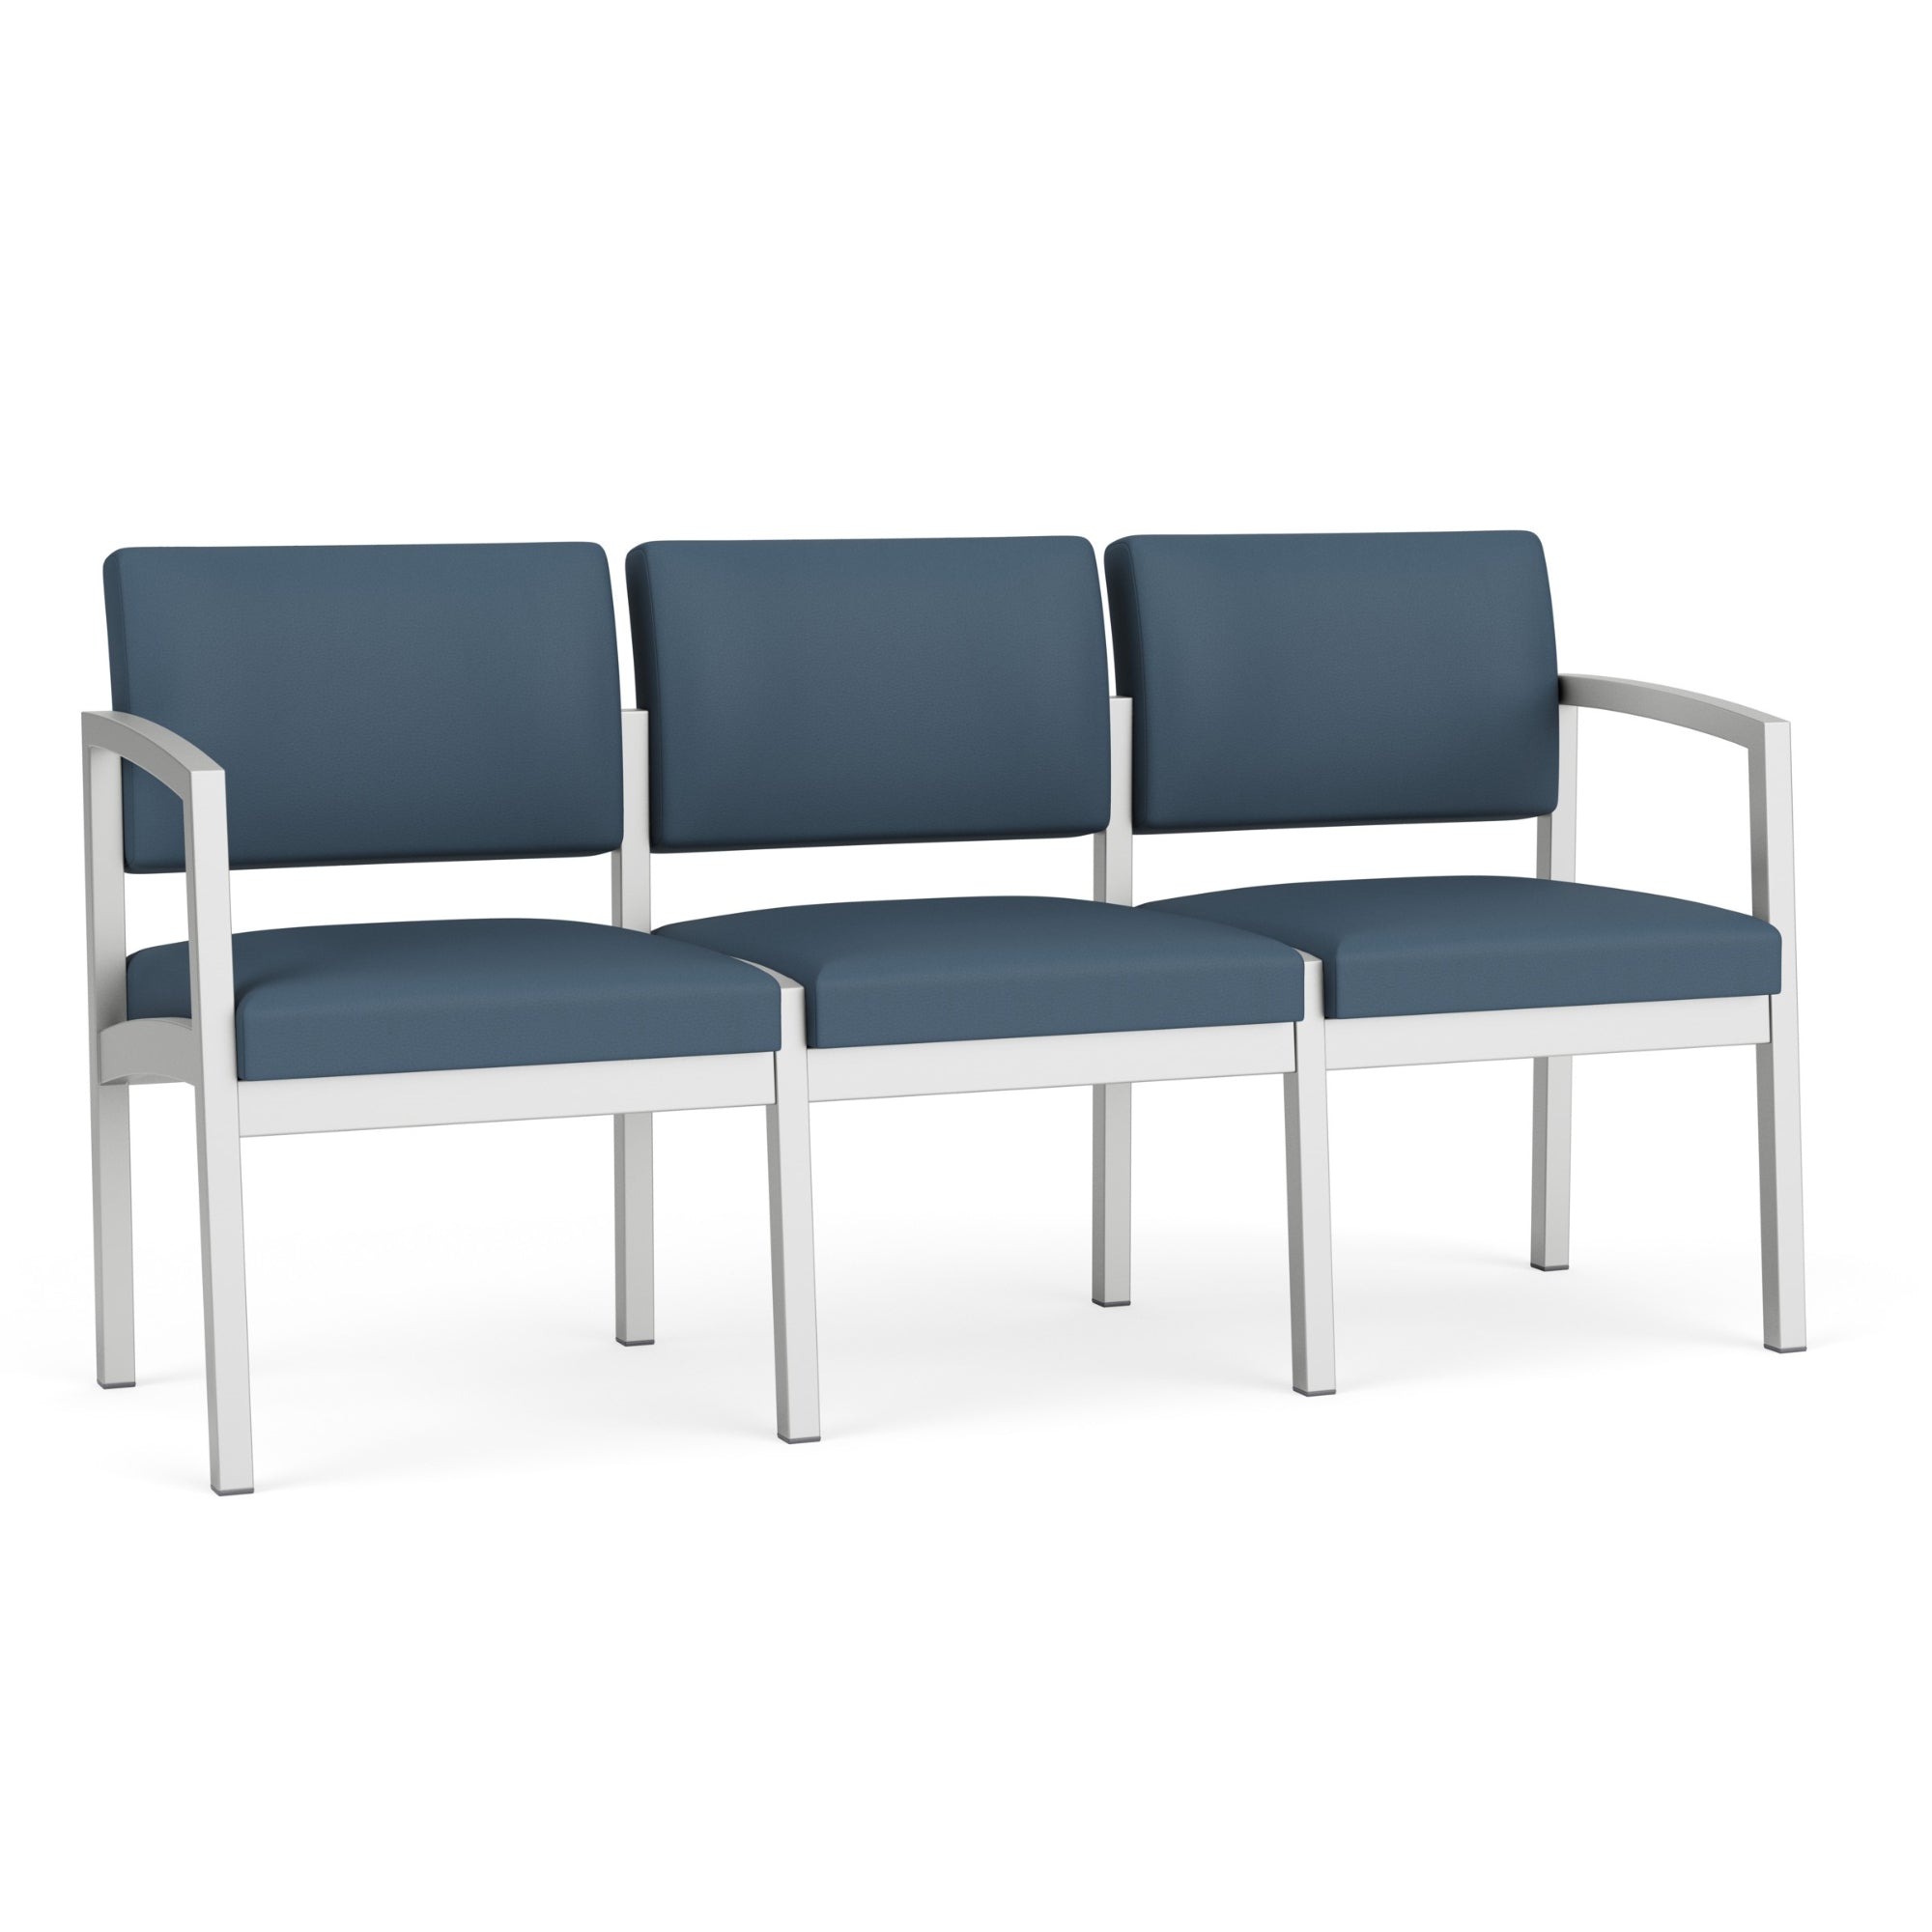 Lenox Steel Collection Reception Seating, 3 Seat Sofa, Healthcare Vinyl Upholstery, FREE SHIPPING